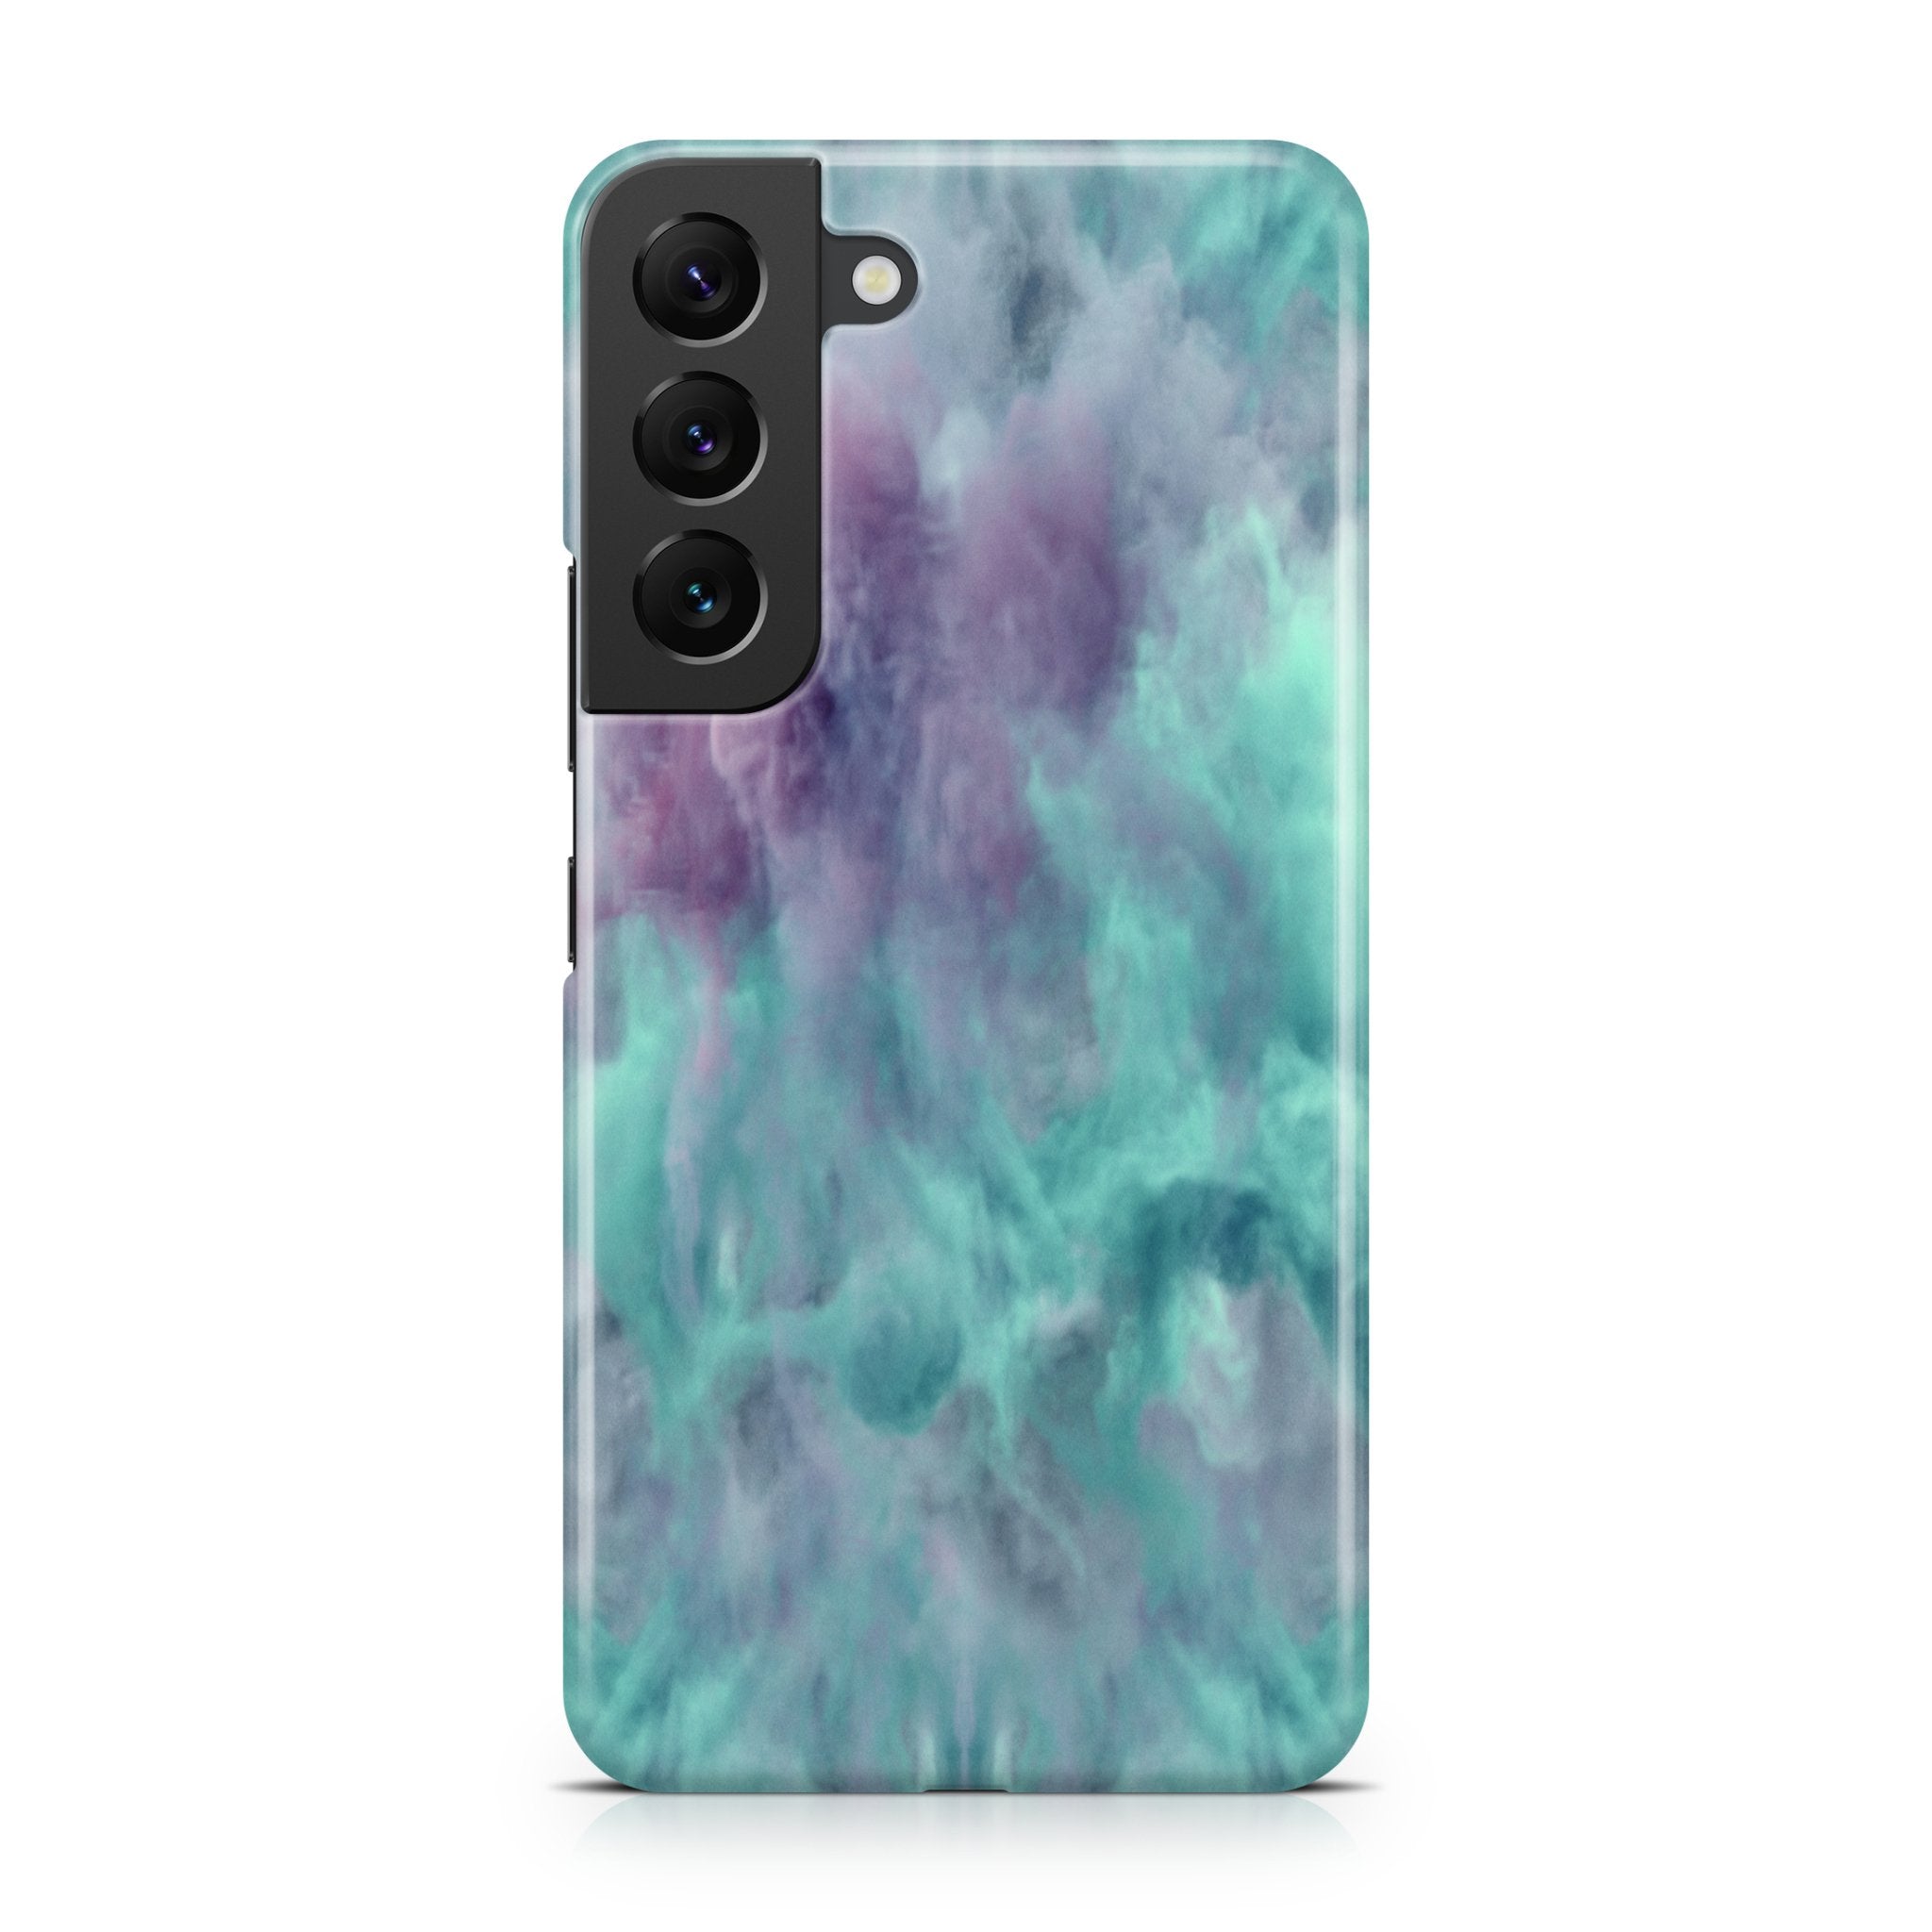 Turquoise Smoke Cloud - Samsung phone case designs by CaseSwagger